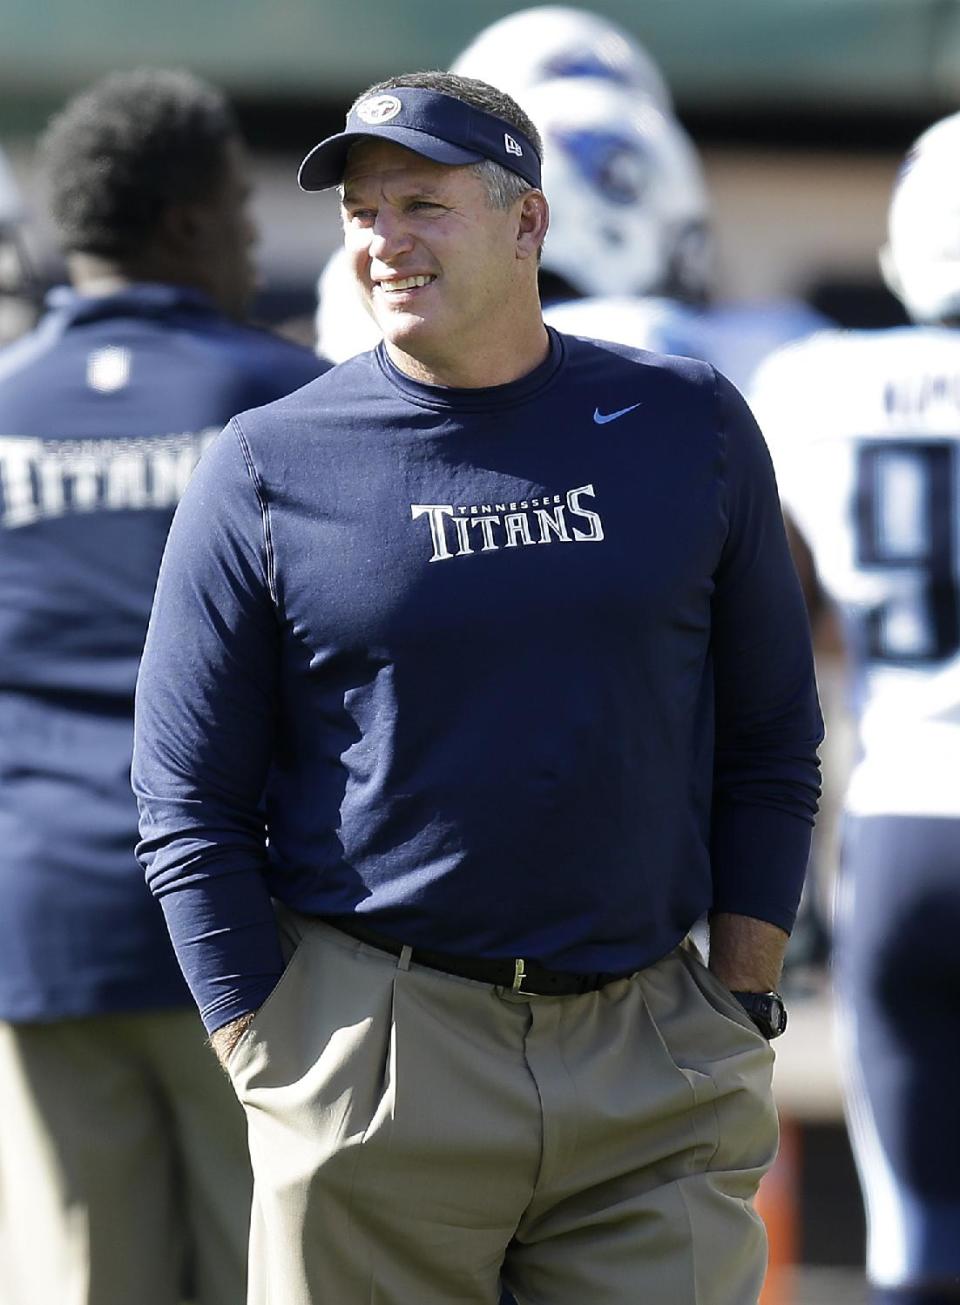 FILE - In this Nov. 24, 2013, file photo, Tennessee Titans head coach Mike Munchak watches as players warm up before an NFL football game against the Oakland Raiders in Oakland, Calif. person familiar with the decision say Titans President Tommy Smith has fired Munchak after three seasons as his head coach and 31 years combined with this franchise as a player and coach. The person spoke to The Associated Press on Saturday, Jan. 4, 2014, on the condition of anonymity because the Titans have not made an official announcement. (AP Photo/Ben Margot, File)